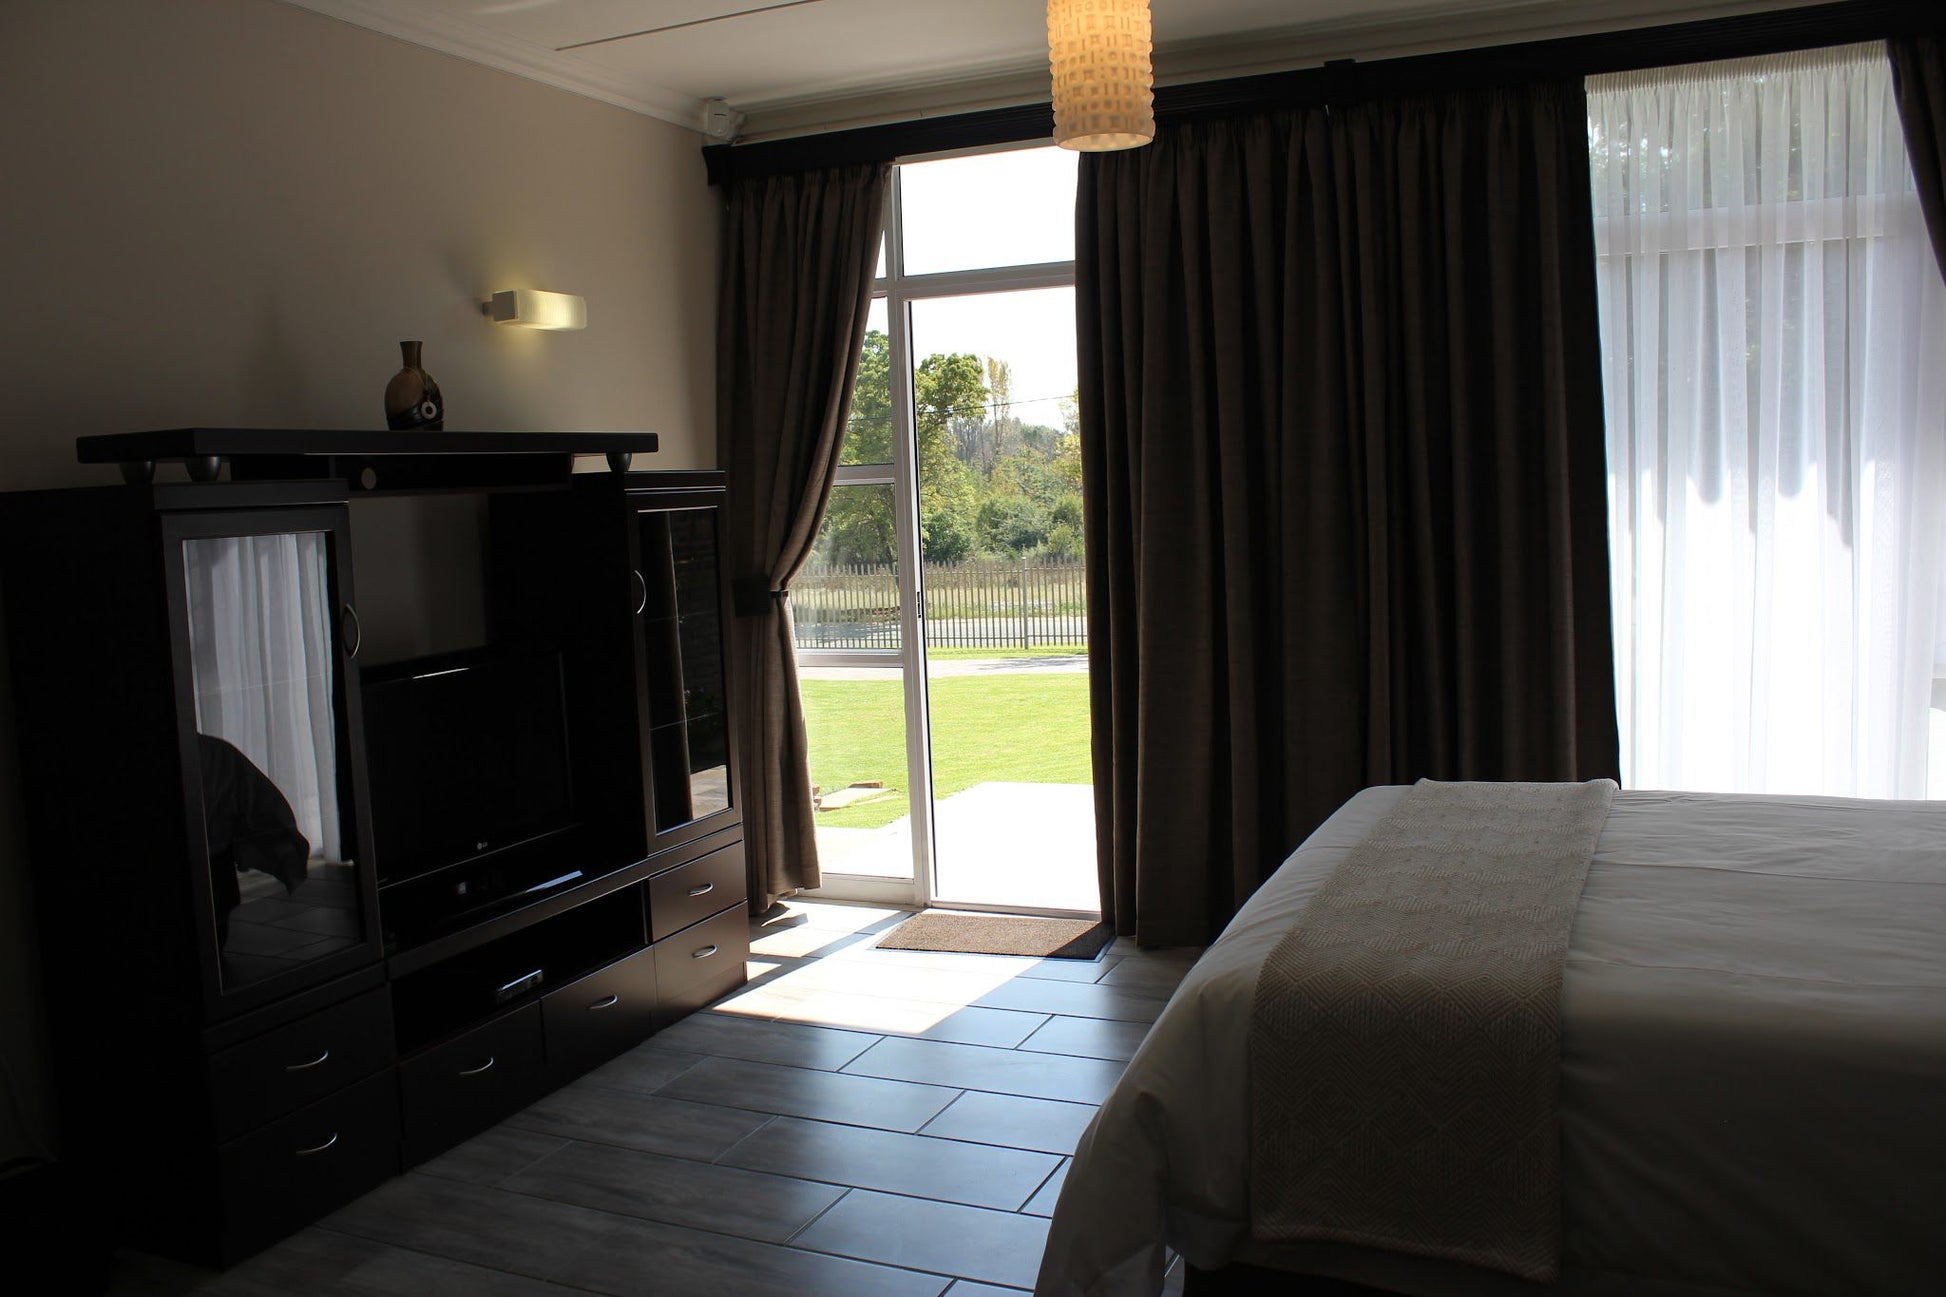 Goedgedacht Guest Rooms Baillie Park Potchefstroom North West Province South Africa 